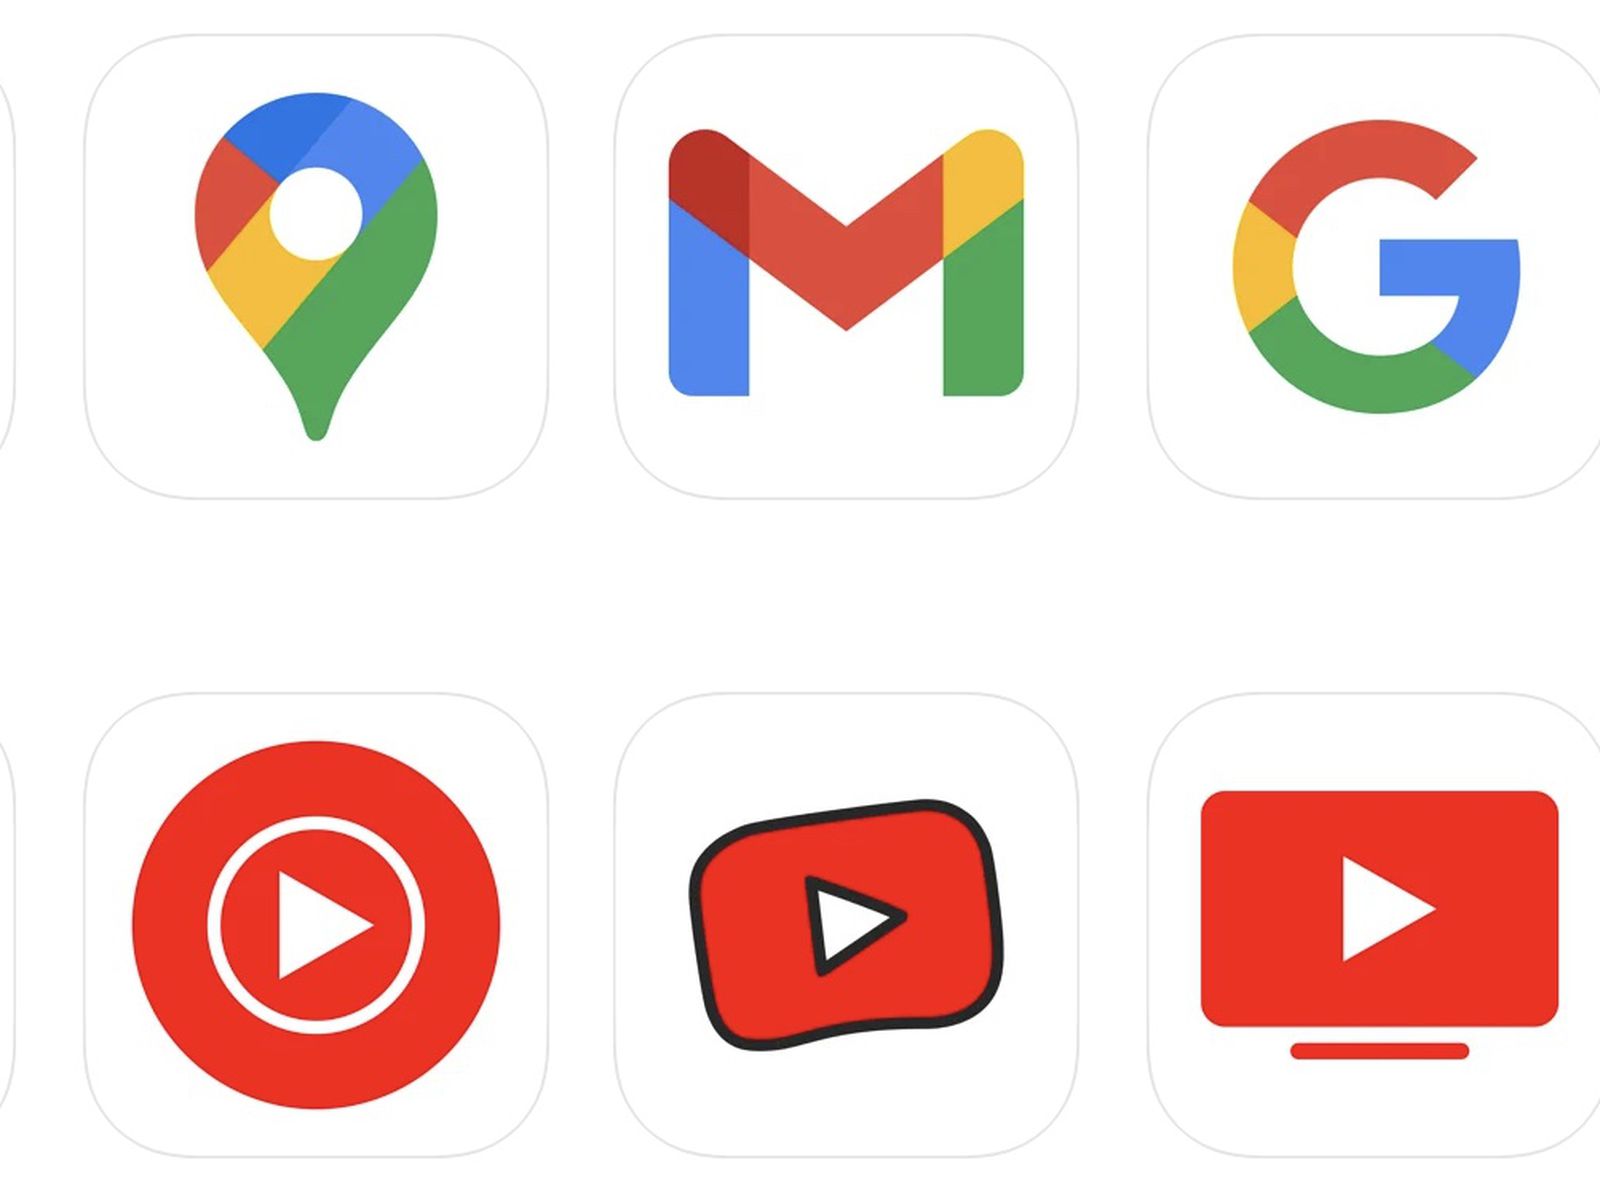 Google Hasn't Updated Its iOS Apps Since the Day Before Apple's